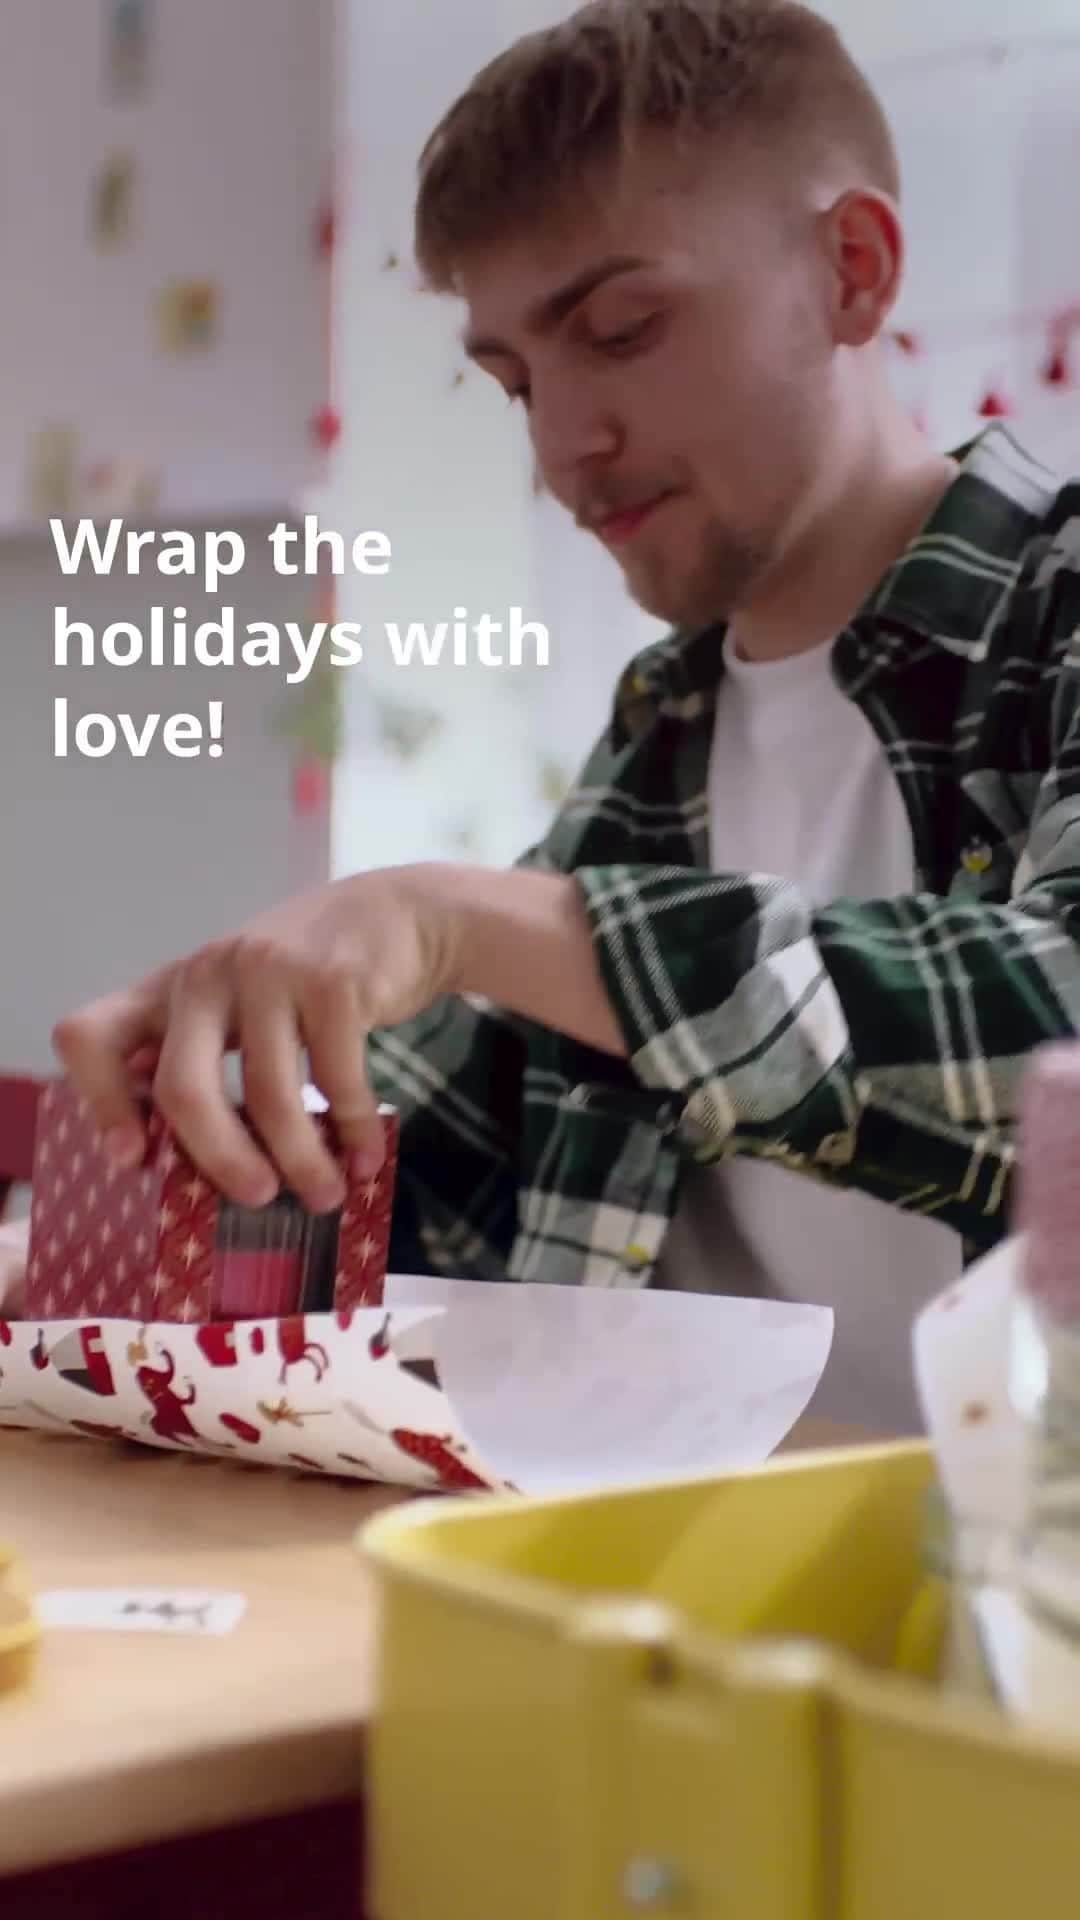 IKEA USAのインスタグラム：「Get 25% off the VINTERFINT holiday collection until 11/27/23 to get a jumpstart on all your holiday gift-giving essentials, from wrapping paper to festive tins. Shop link in bio.」